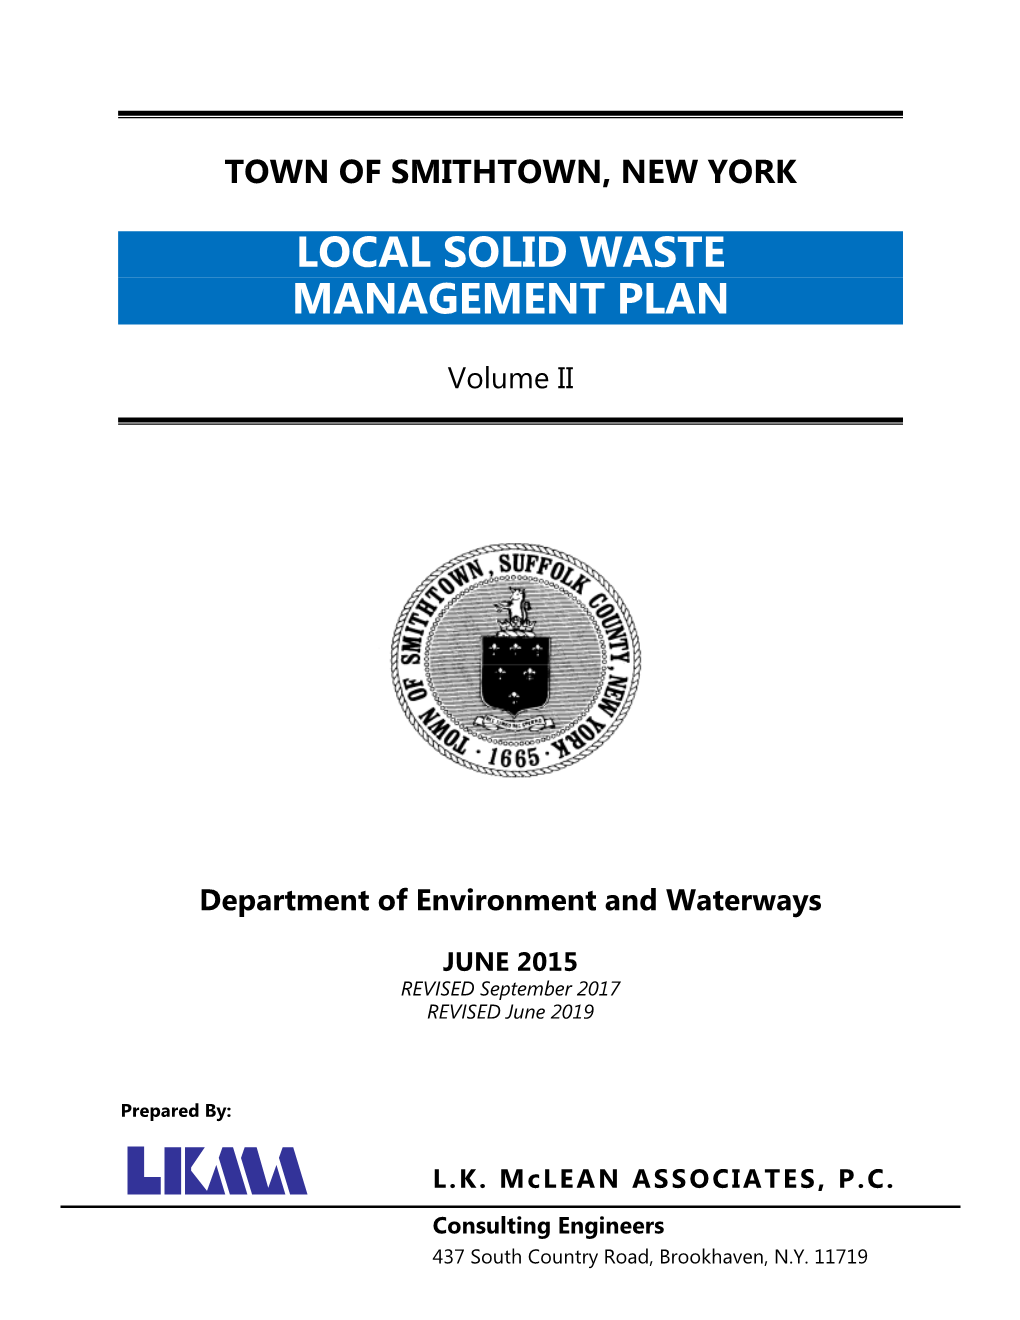 Town of Smithtown, New York Local Solid Waste Management Plan